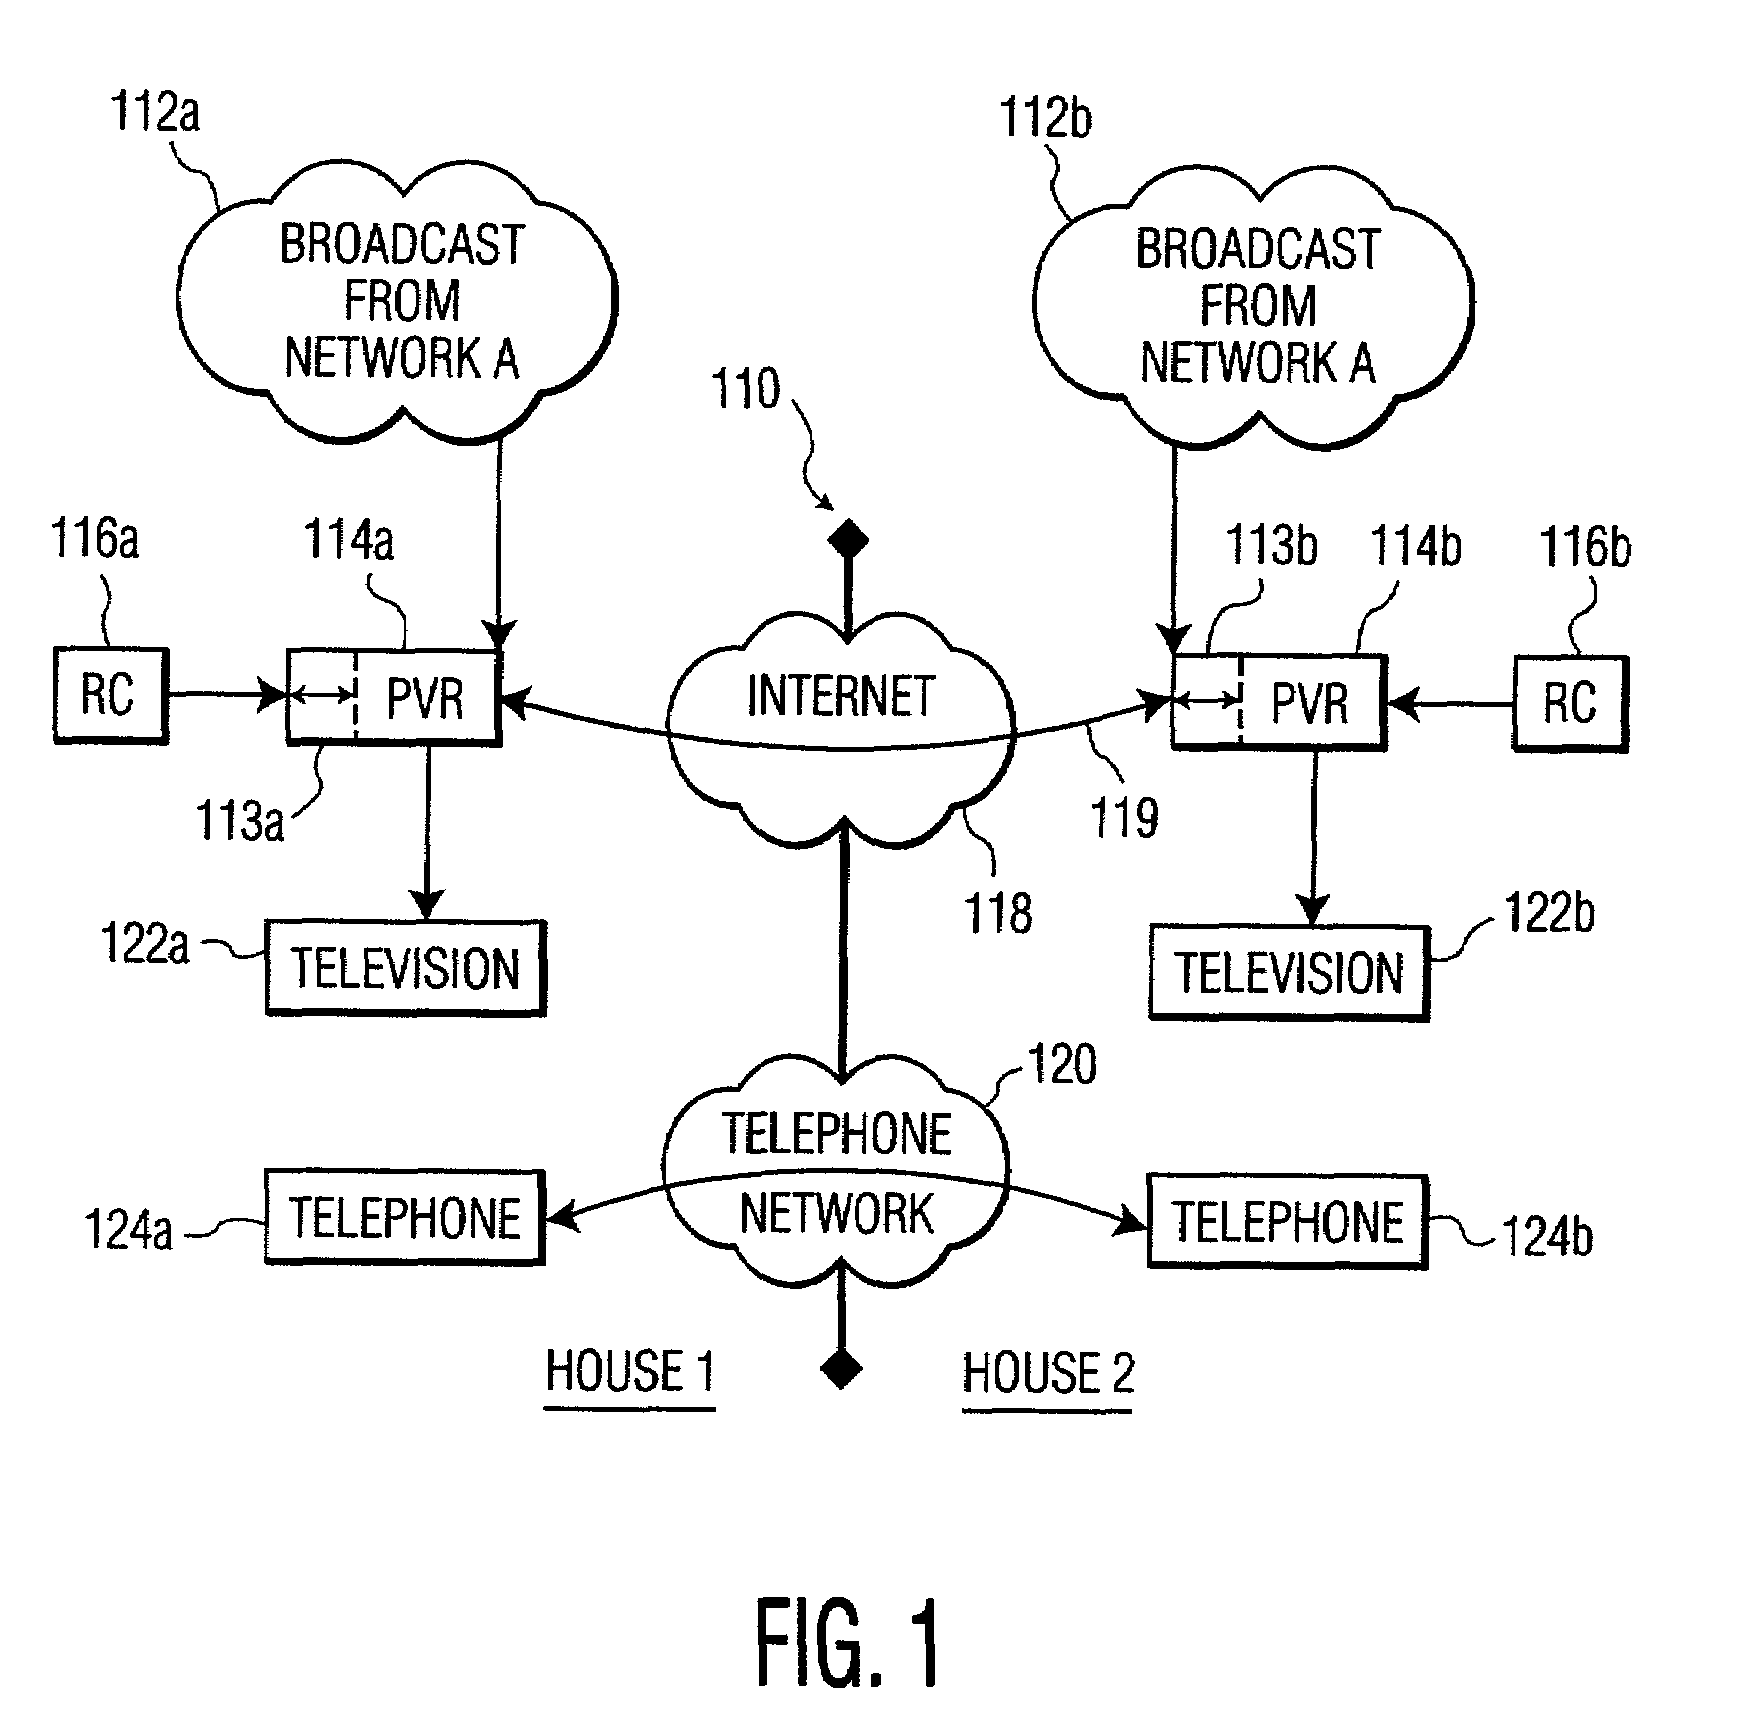 Apparatus and method for synchronizing presentation from bit streams based on their content